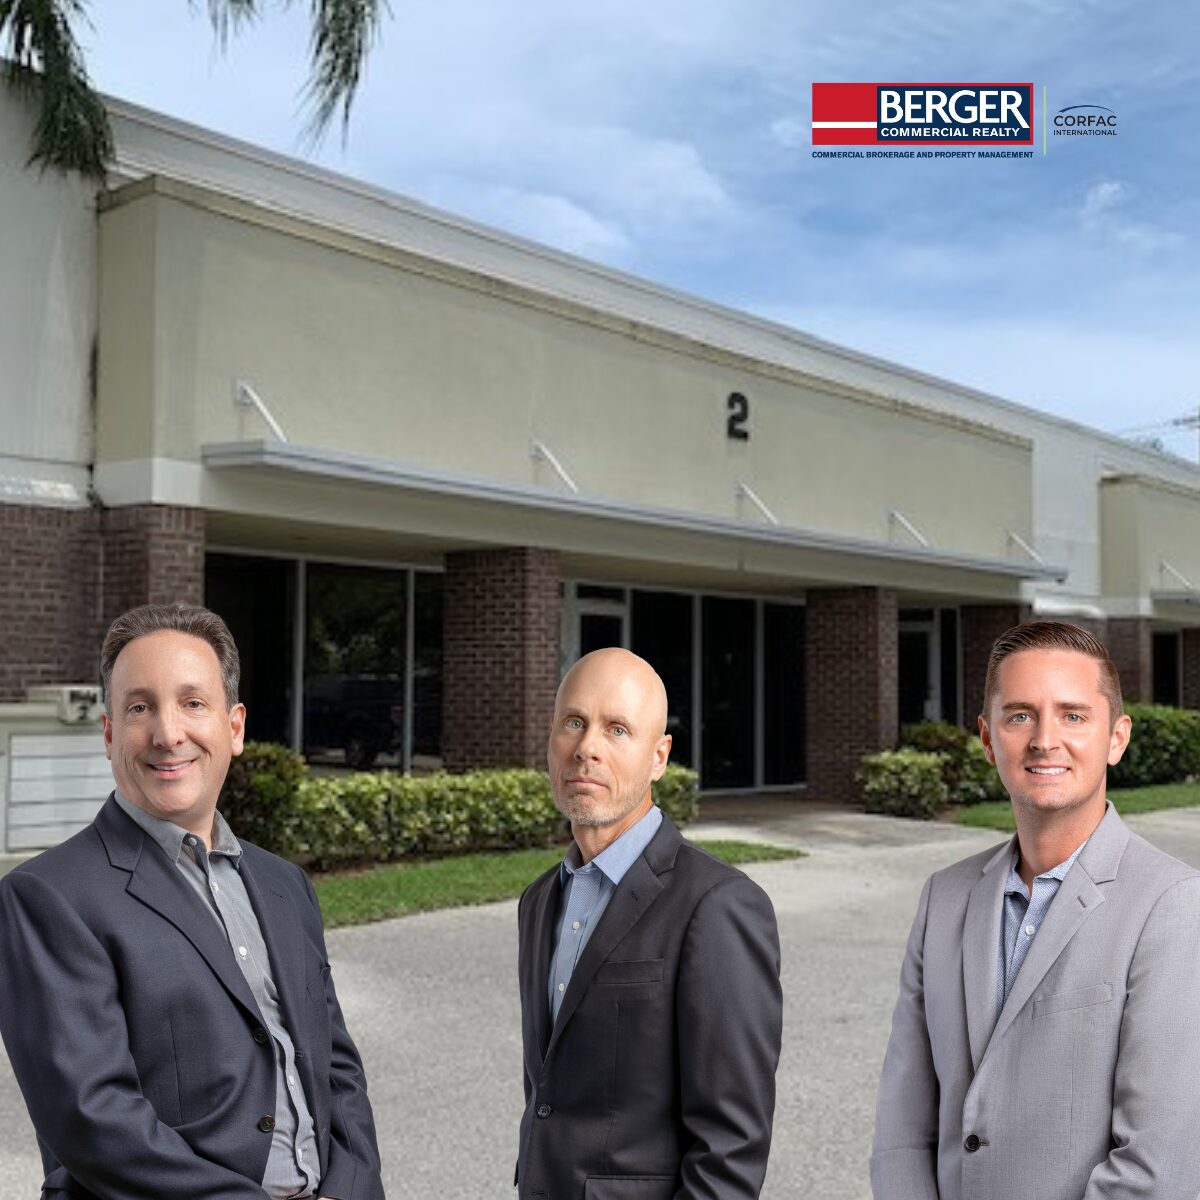 Berger Commercial Realty’s Graves, Thiel & Oxenberg Negotiate 8,400 SF Industrial Lease Deal, Bring Prospect Park II To 88% Occupied